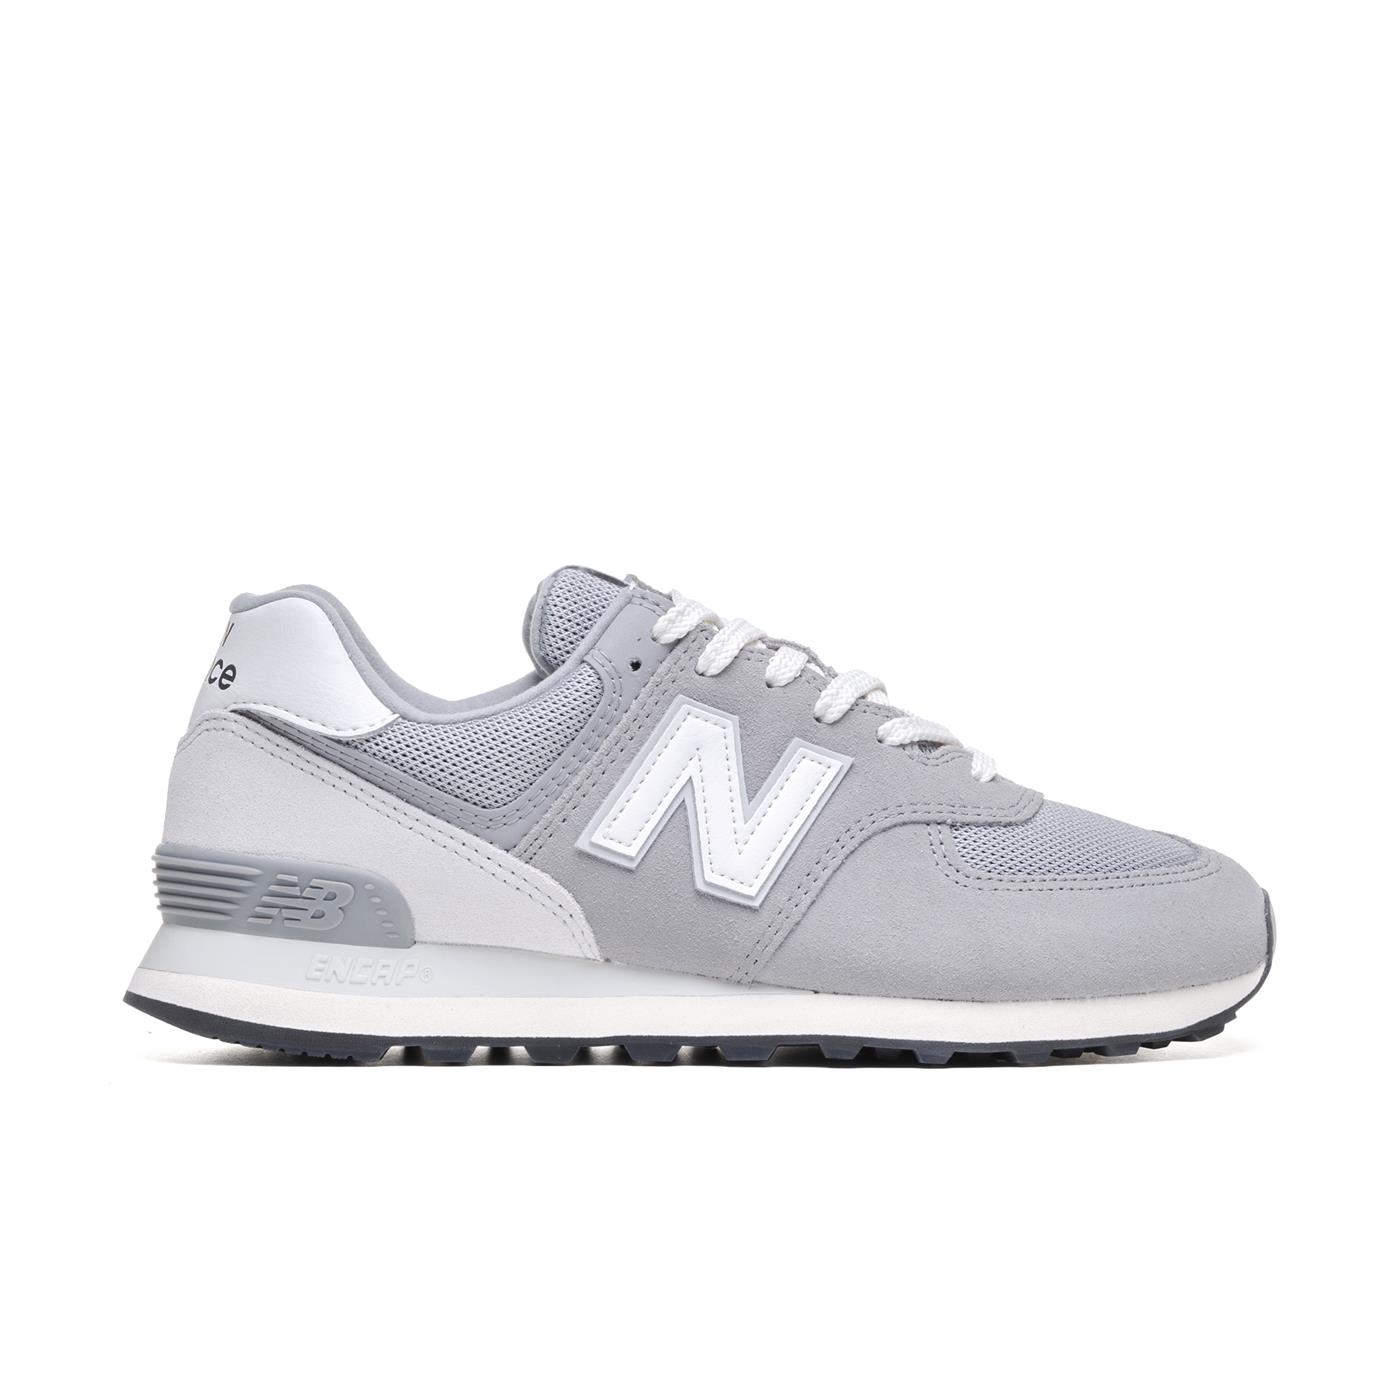 The New Balance 247 Leather is a low top sneaker that is the choice if you are looking for | RvceShops | Zapatillas NEW BALANCE 574 V2 Gris de Hombre | U574TG2